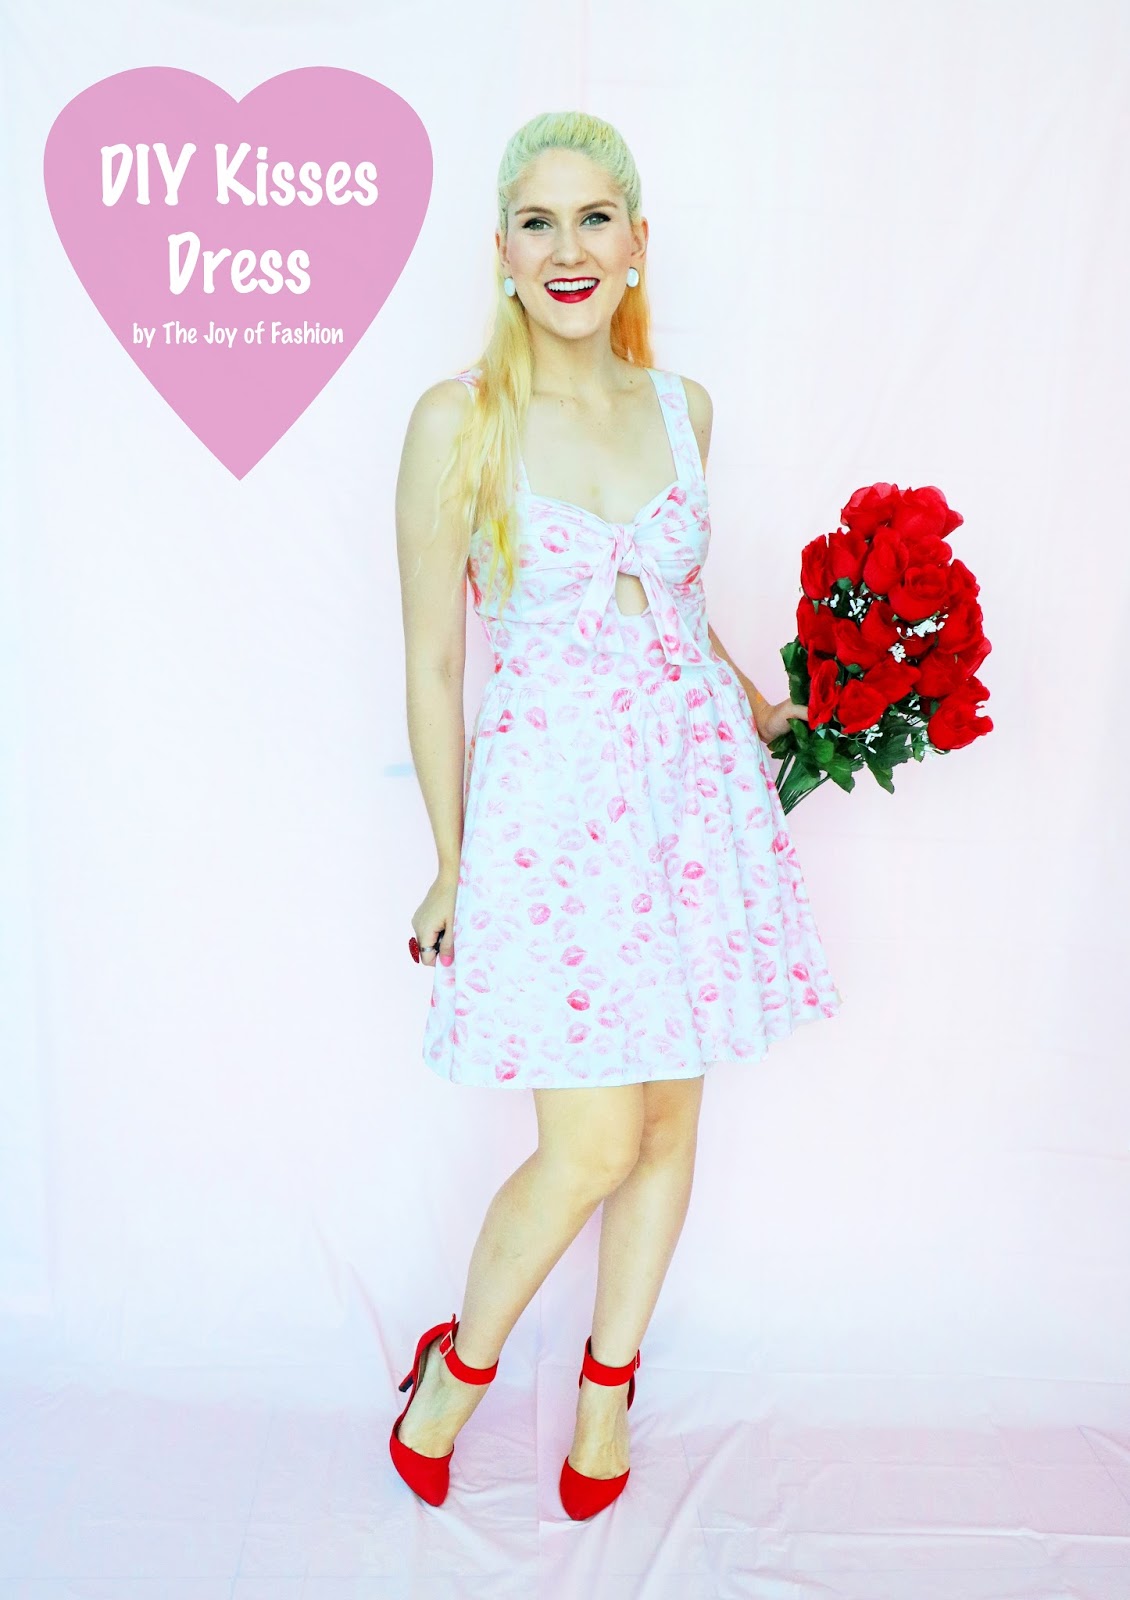 This adorable kiss dress is easier to make than you think! Click through for tutorial